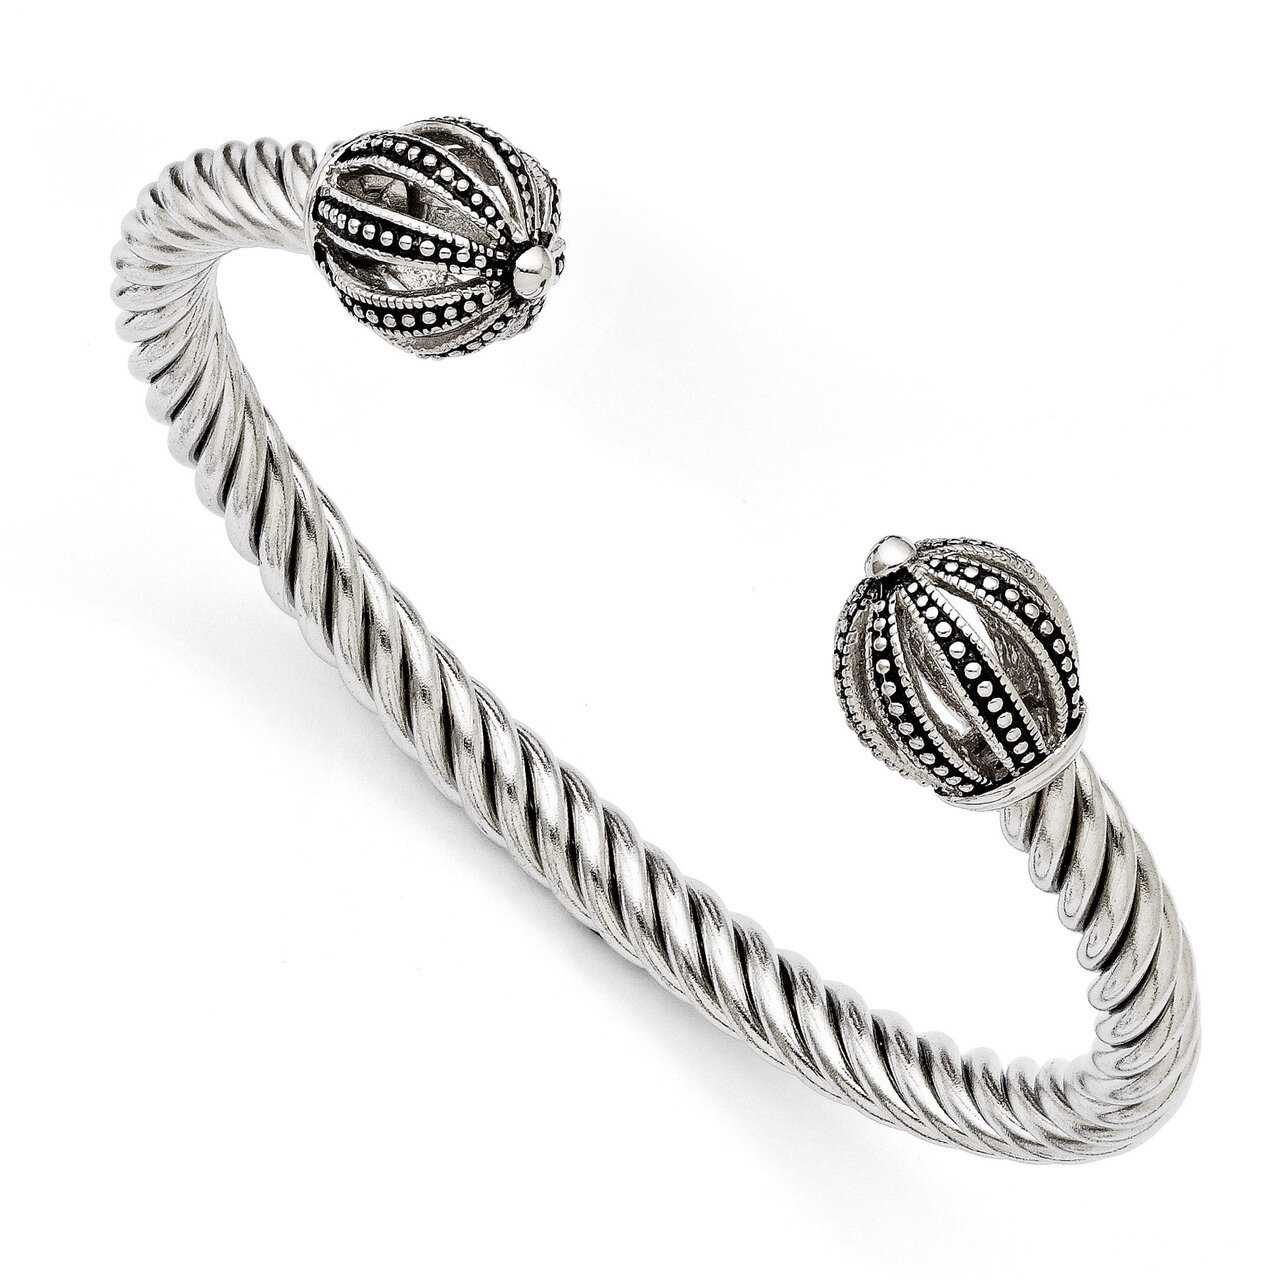 Antiqued Twisted Cuff Bracelet - Stainless Steel SRB1249